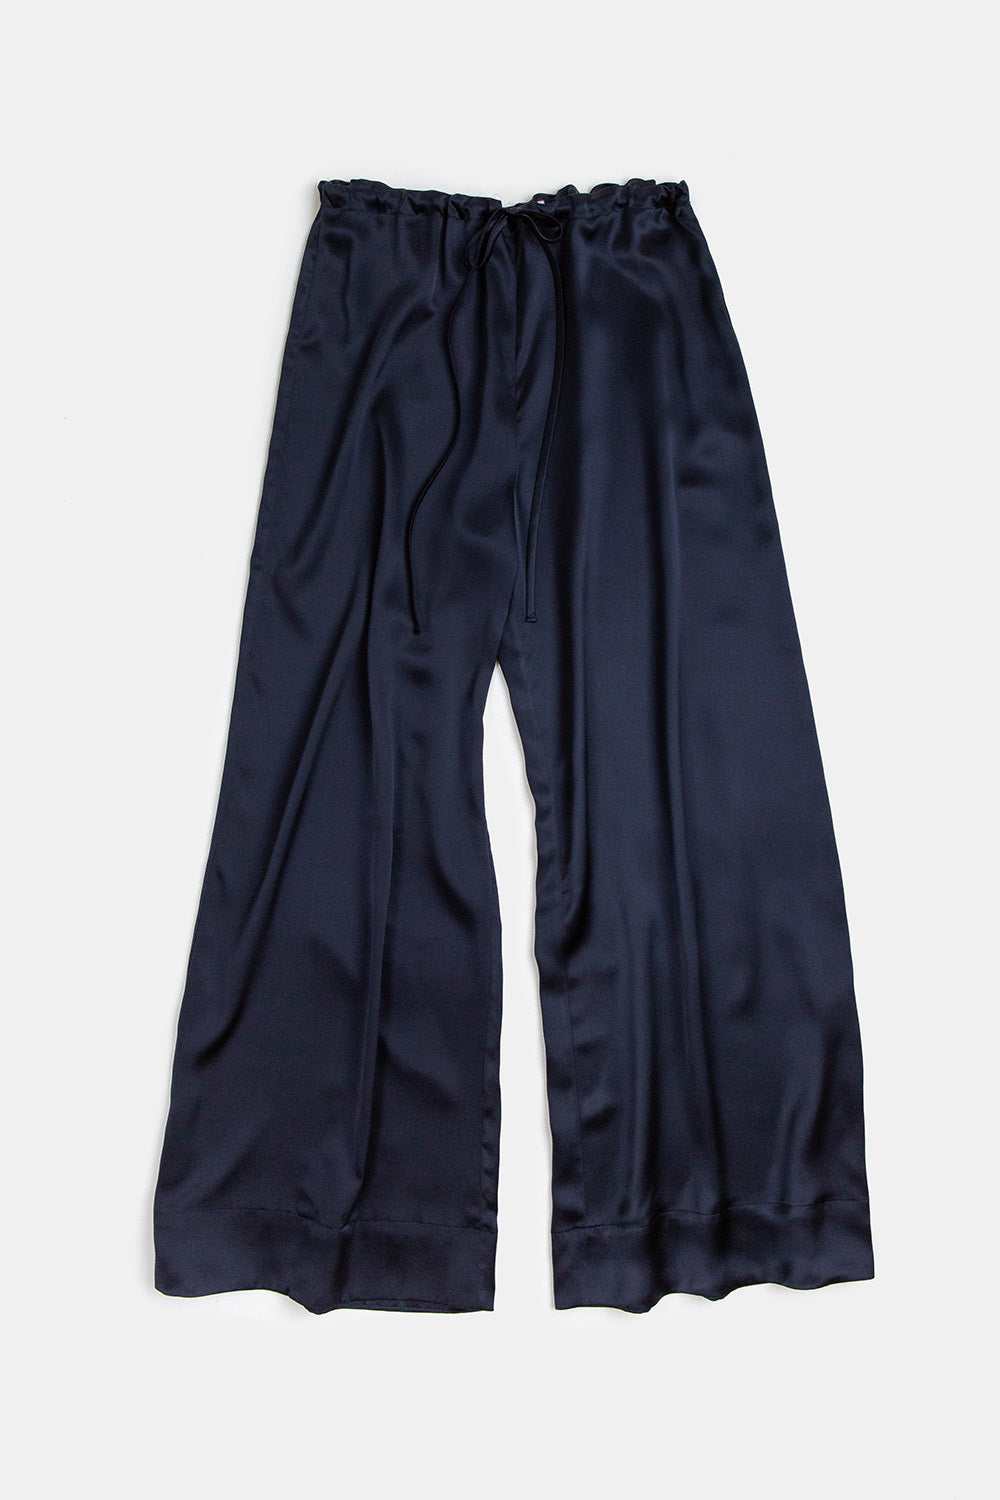 Jules Silk Charmeuse Pant in Midnight